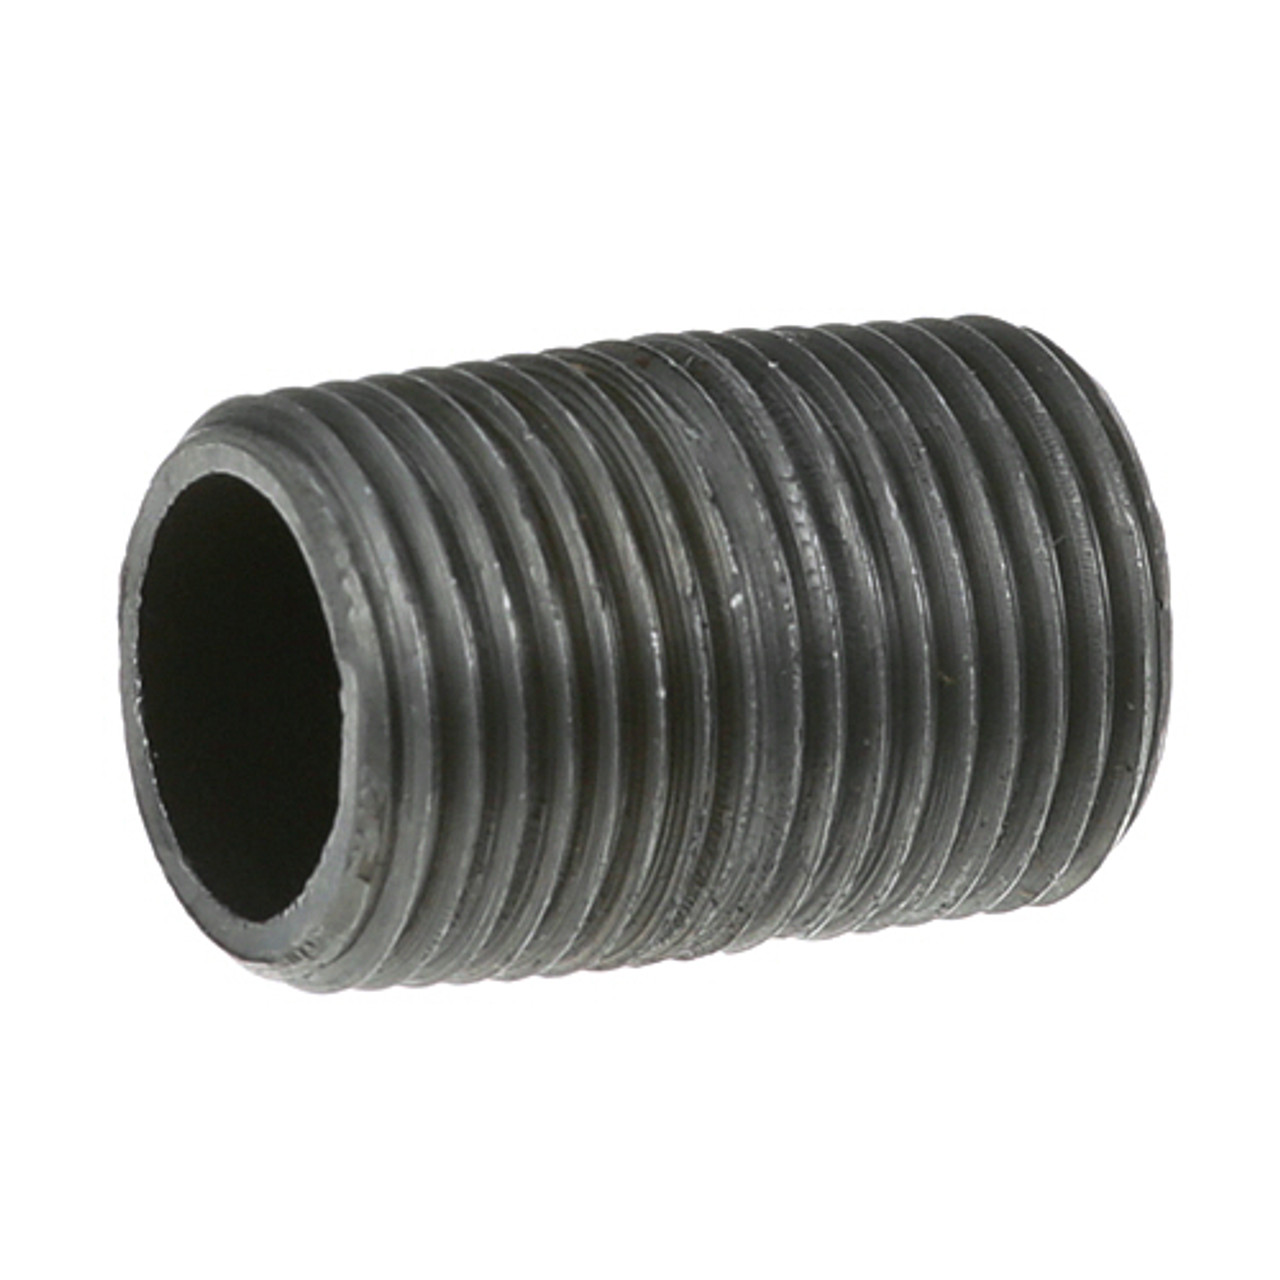 Nipple - Replacement Part For Hobart FP-035-46